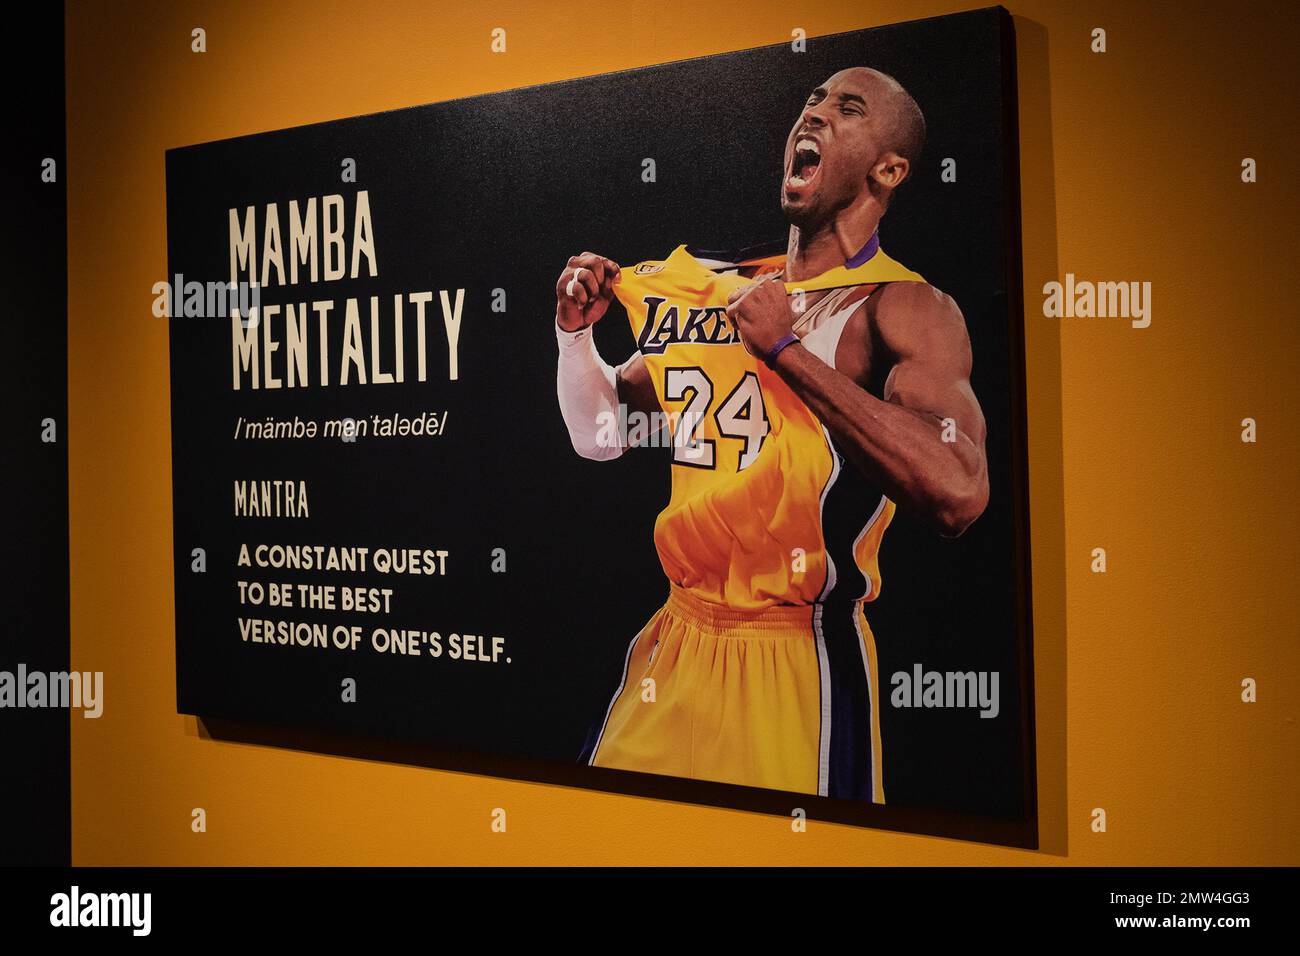 Kobe Bryant Most Valuable NBA Jersey to Auction at Sotheby's